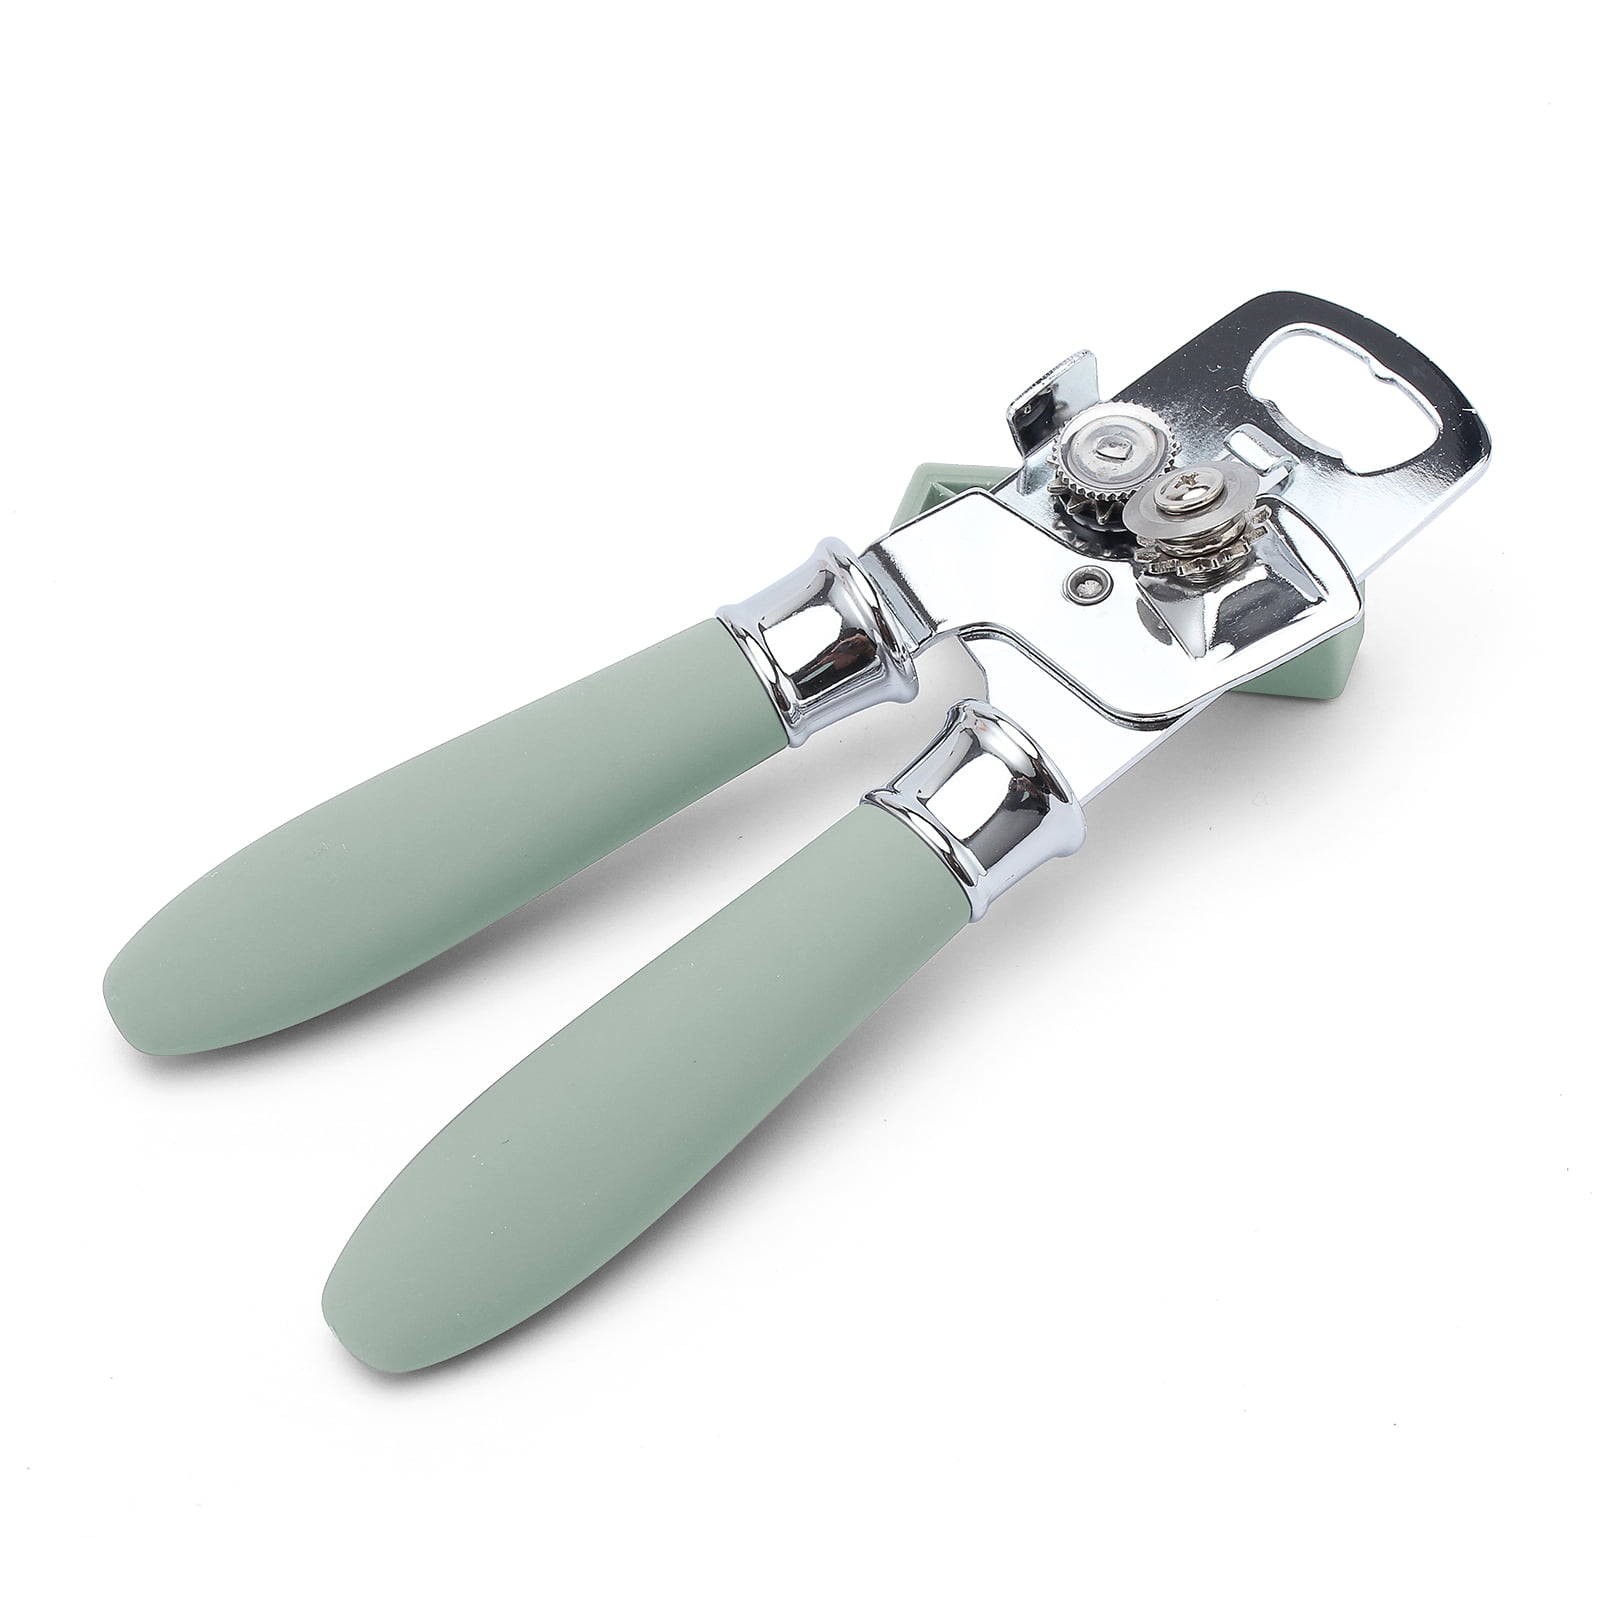 Comfy Grip Mint Green Stainless Steel Can Opener - 7 3/4 x 2 x 2 1/